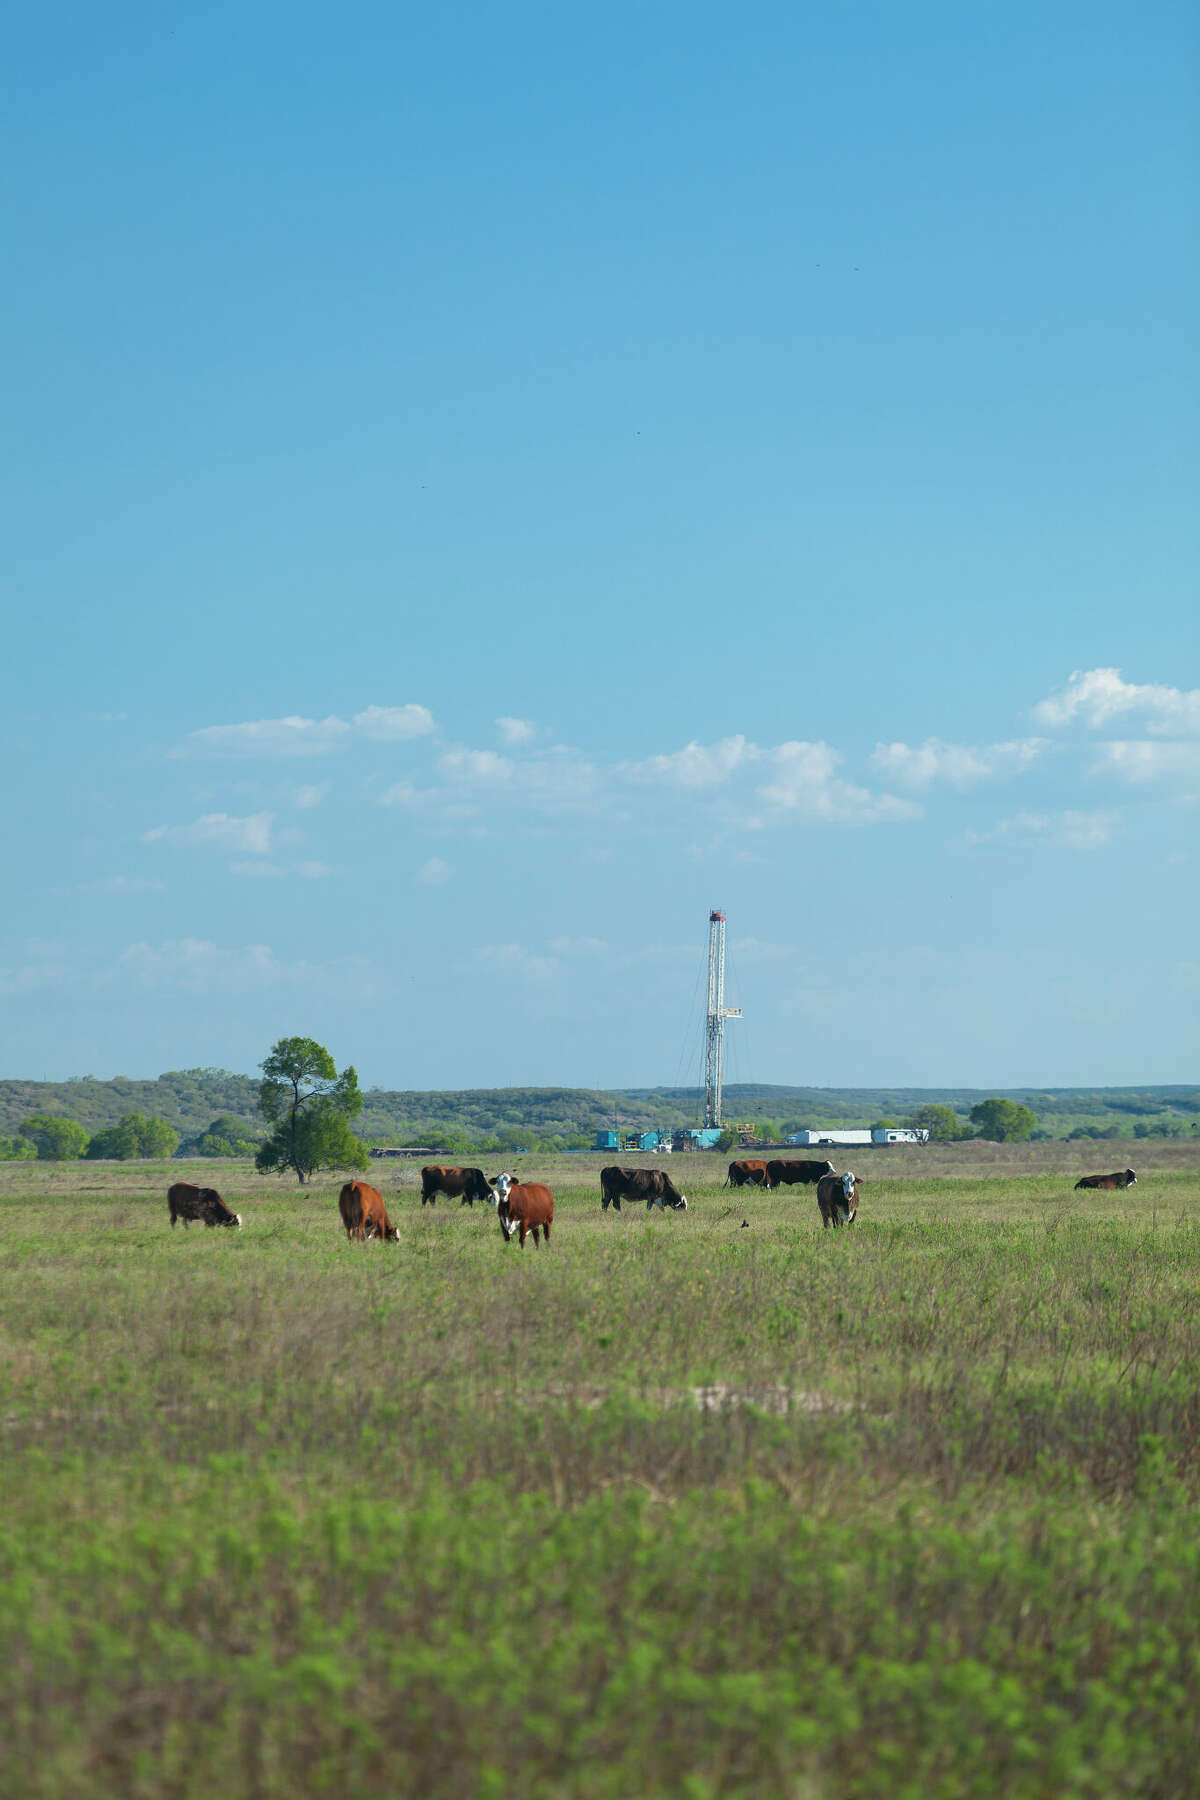 Milestone Environmental's Milestone Carbon unit has agreed to evaluate some of Texas Pacific Land's acreage for possible carbon capture and sequestration projects.